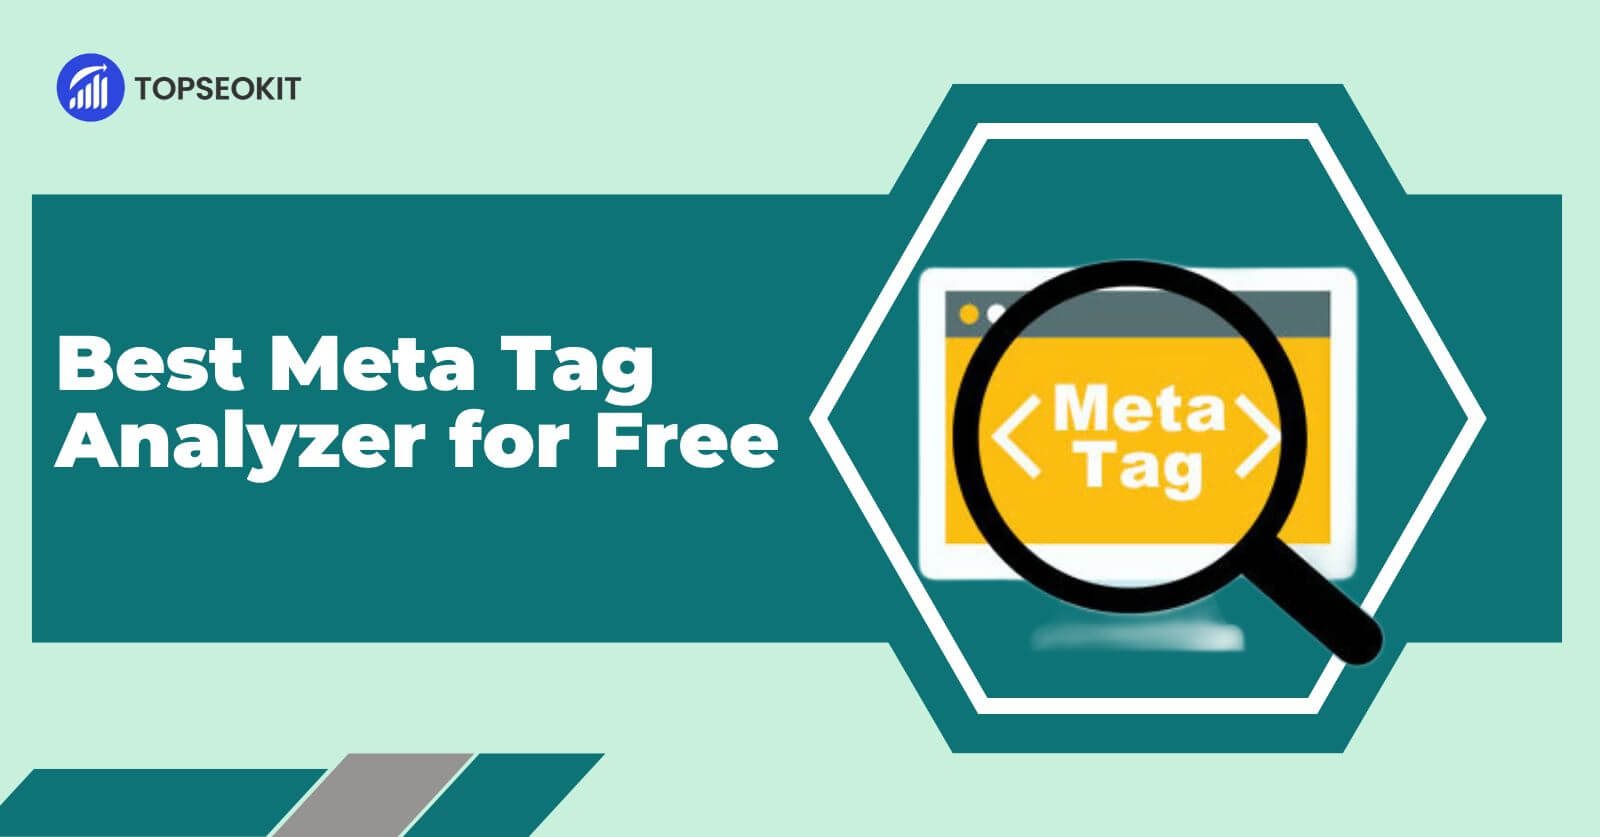 Discover the Best Meta Tag Analyzer – for FREE!